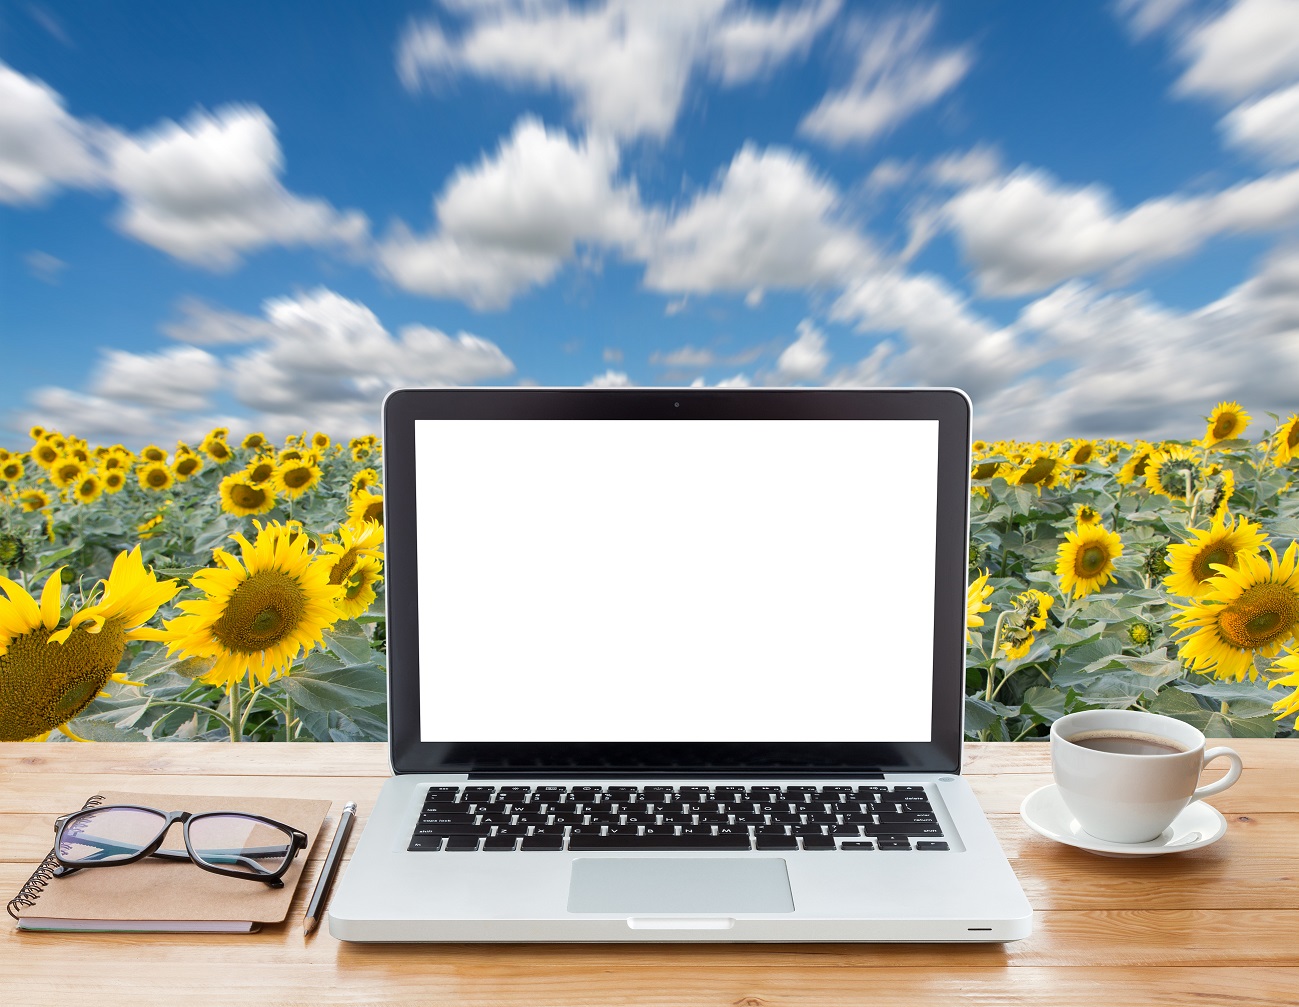 Picture of laptop, glasses and coffee cup on desk with sunflowers and sky in background.